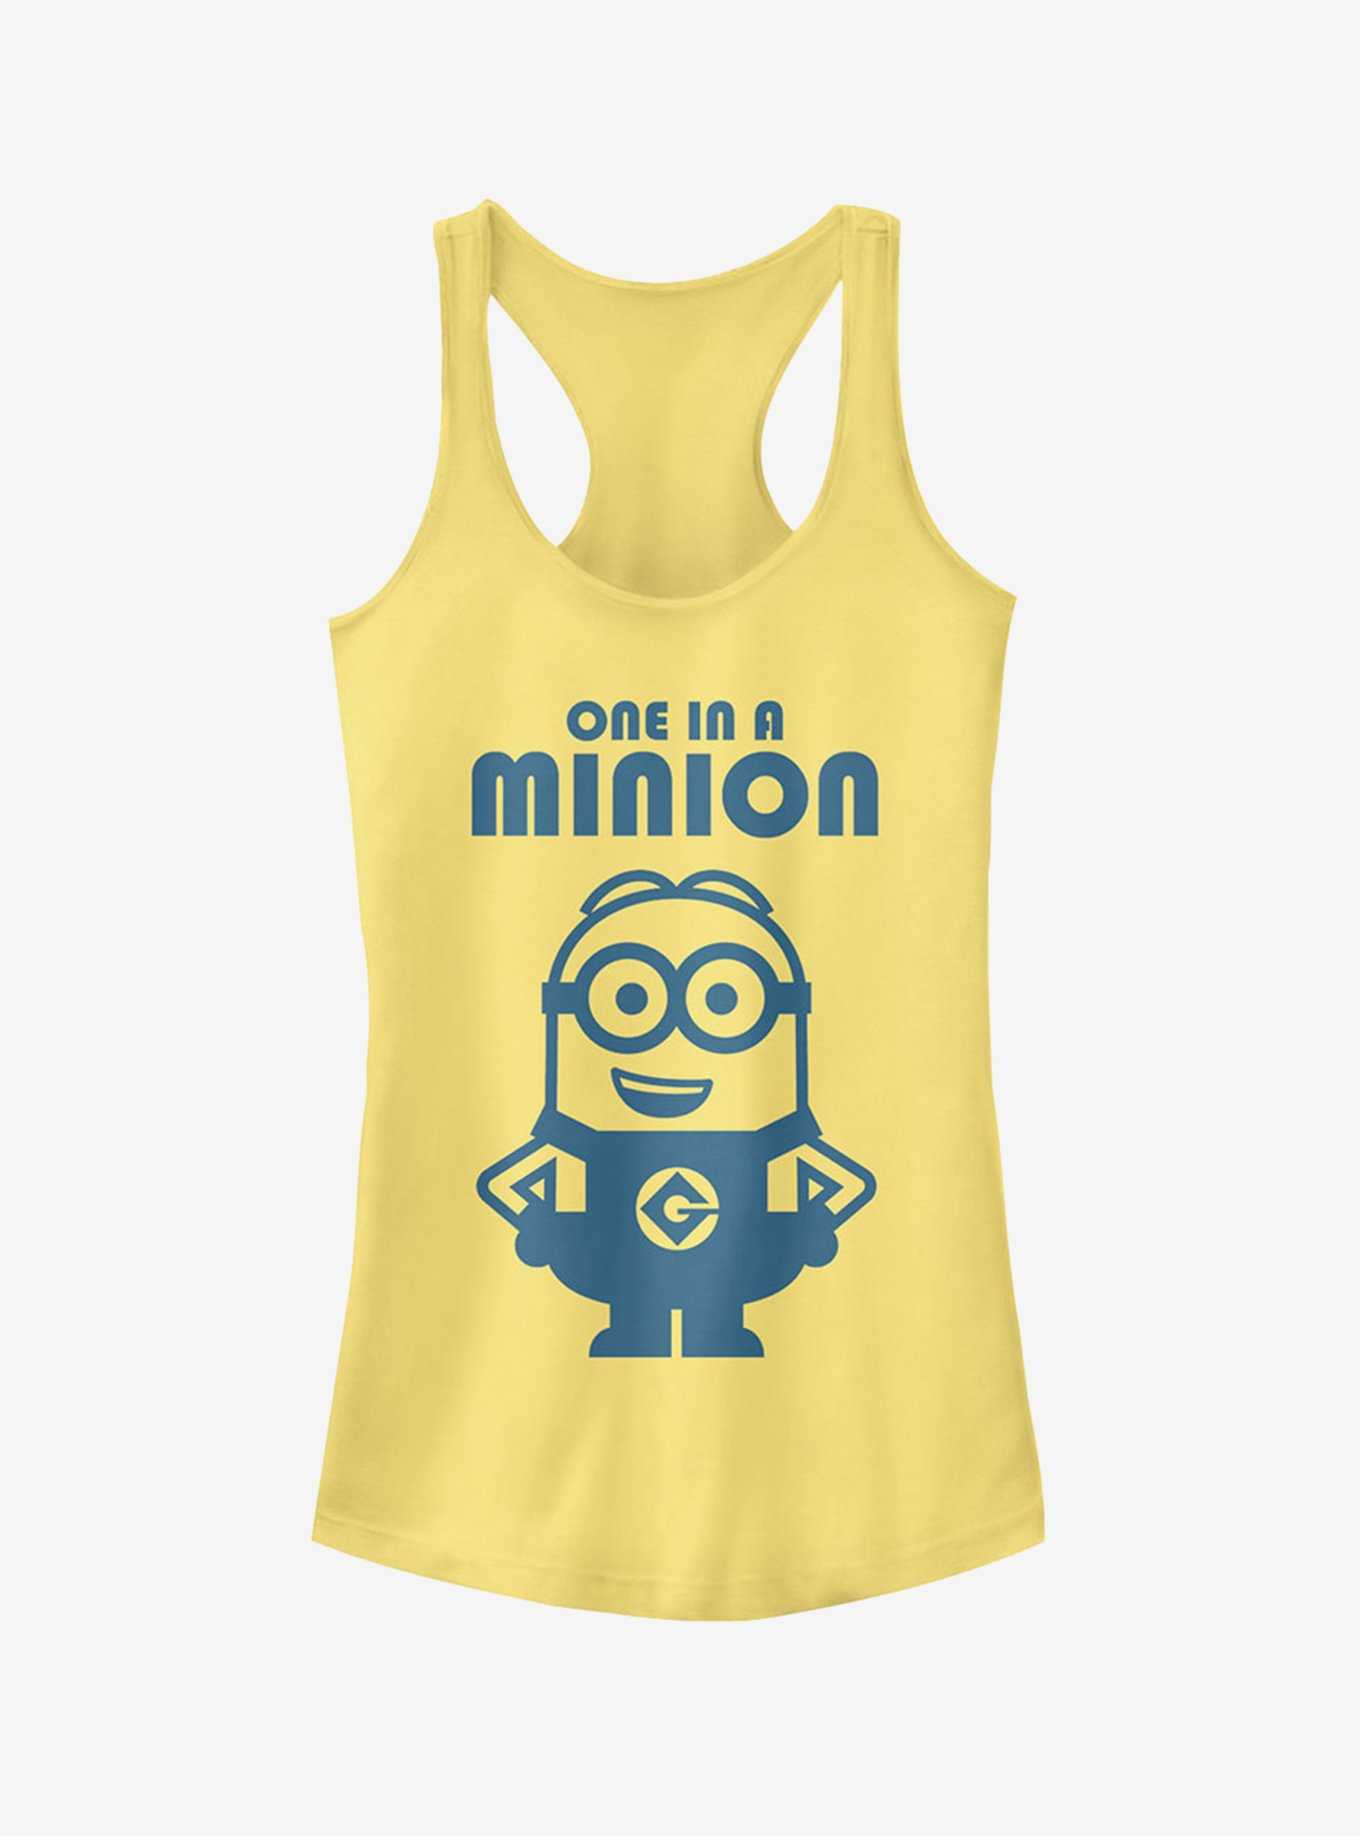 One in Minion Smile Girls Tank, , hi-res